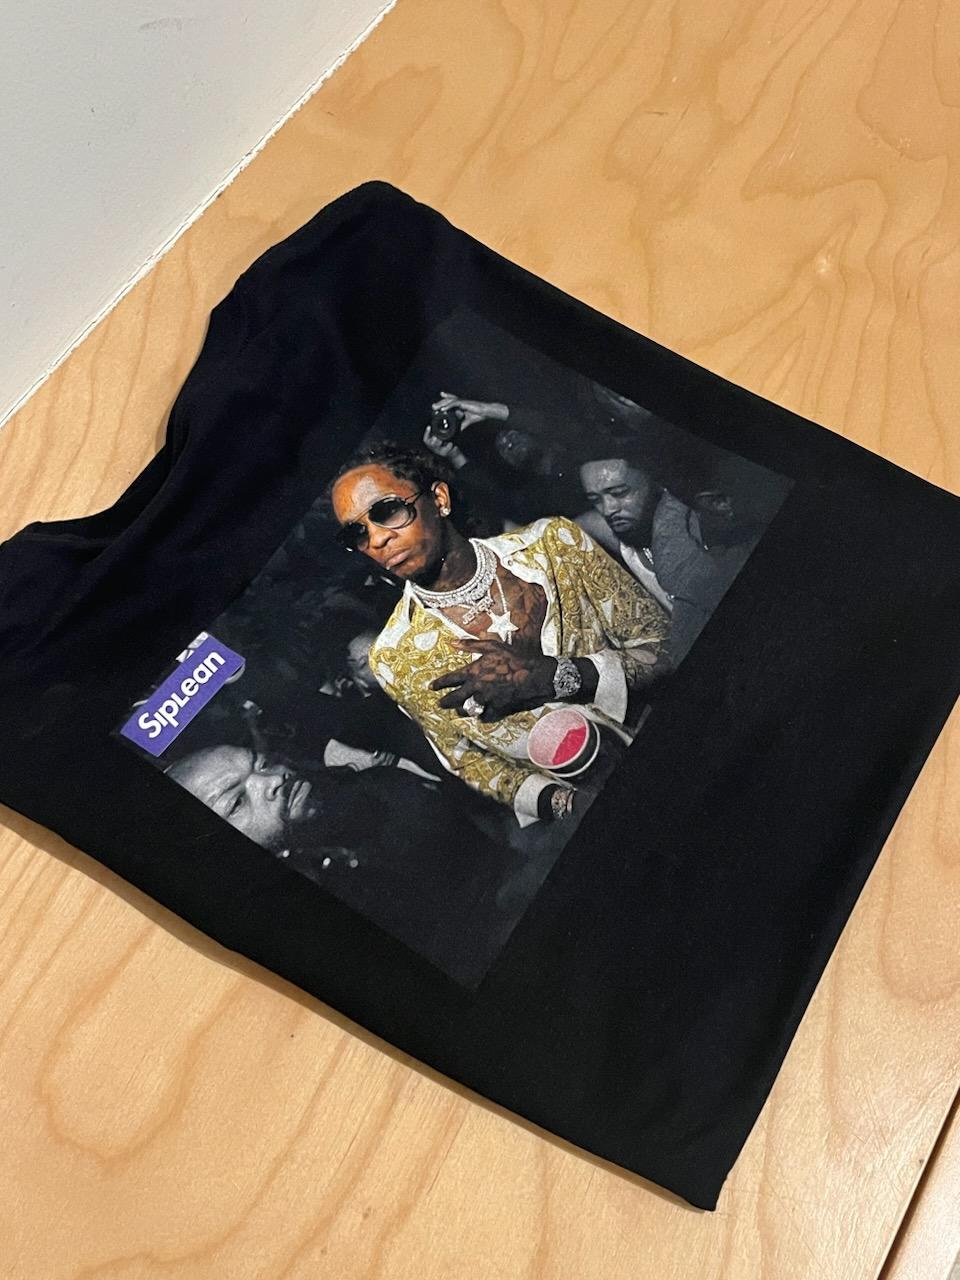 Image of Siplean "Free YSL" T-Shirt